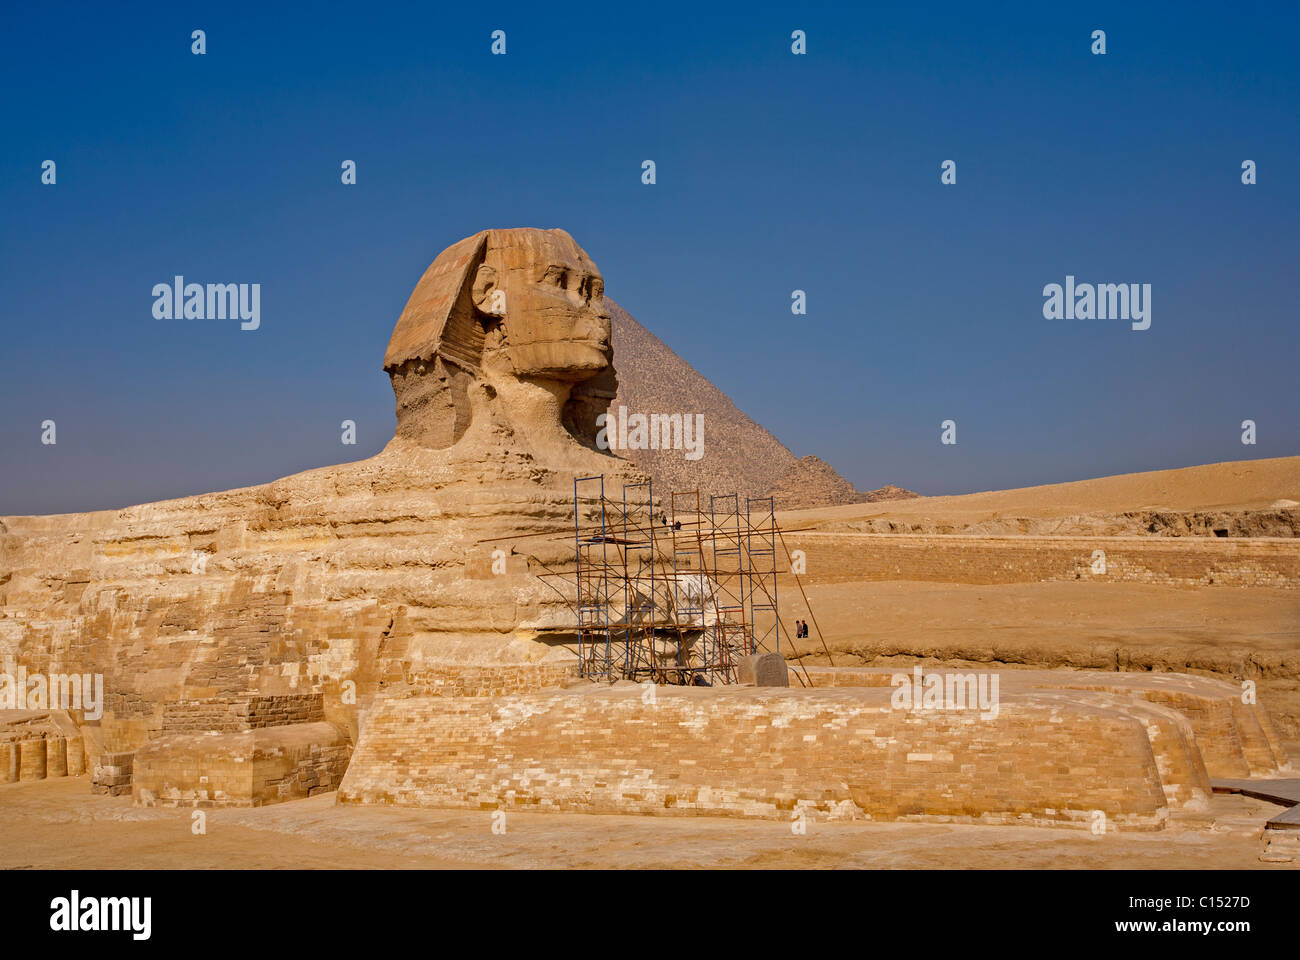 The morning smoke clears to view both the Great Sphinx of Giza and the Pyramid of Khufu (Cheops) in Egypt Stock Photo